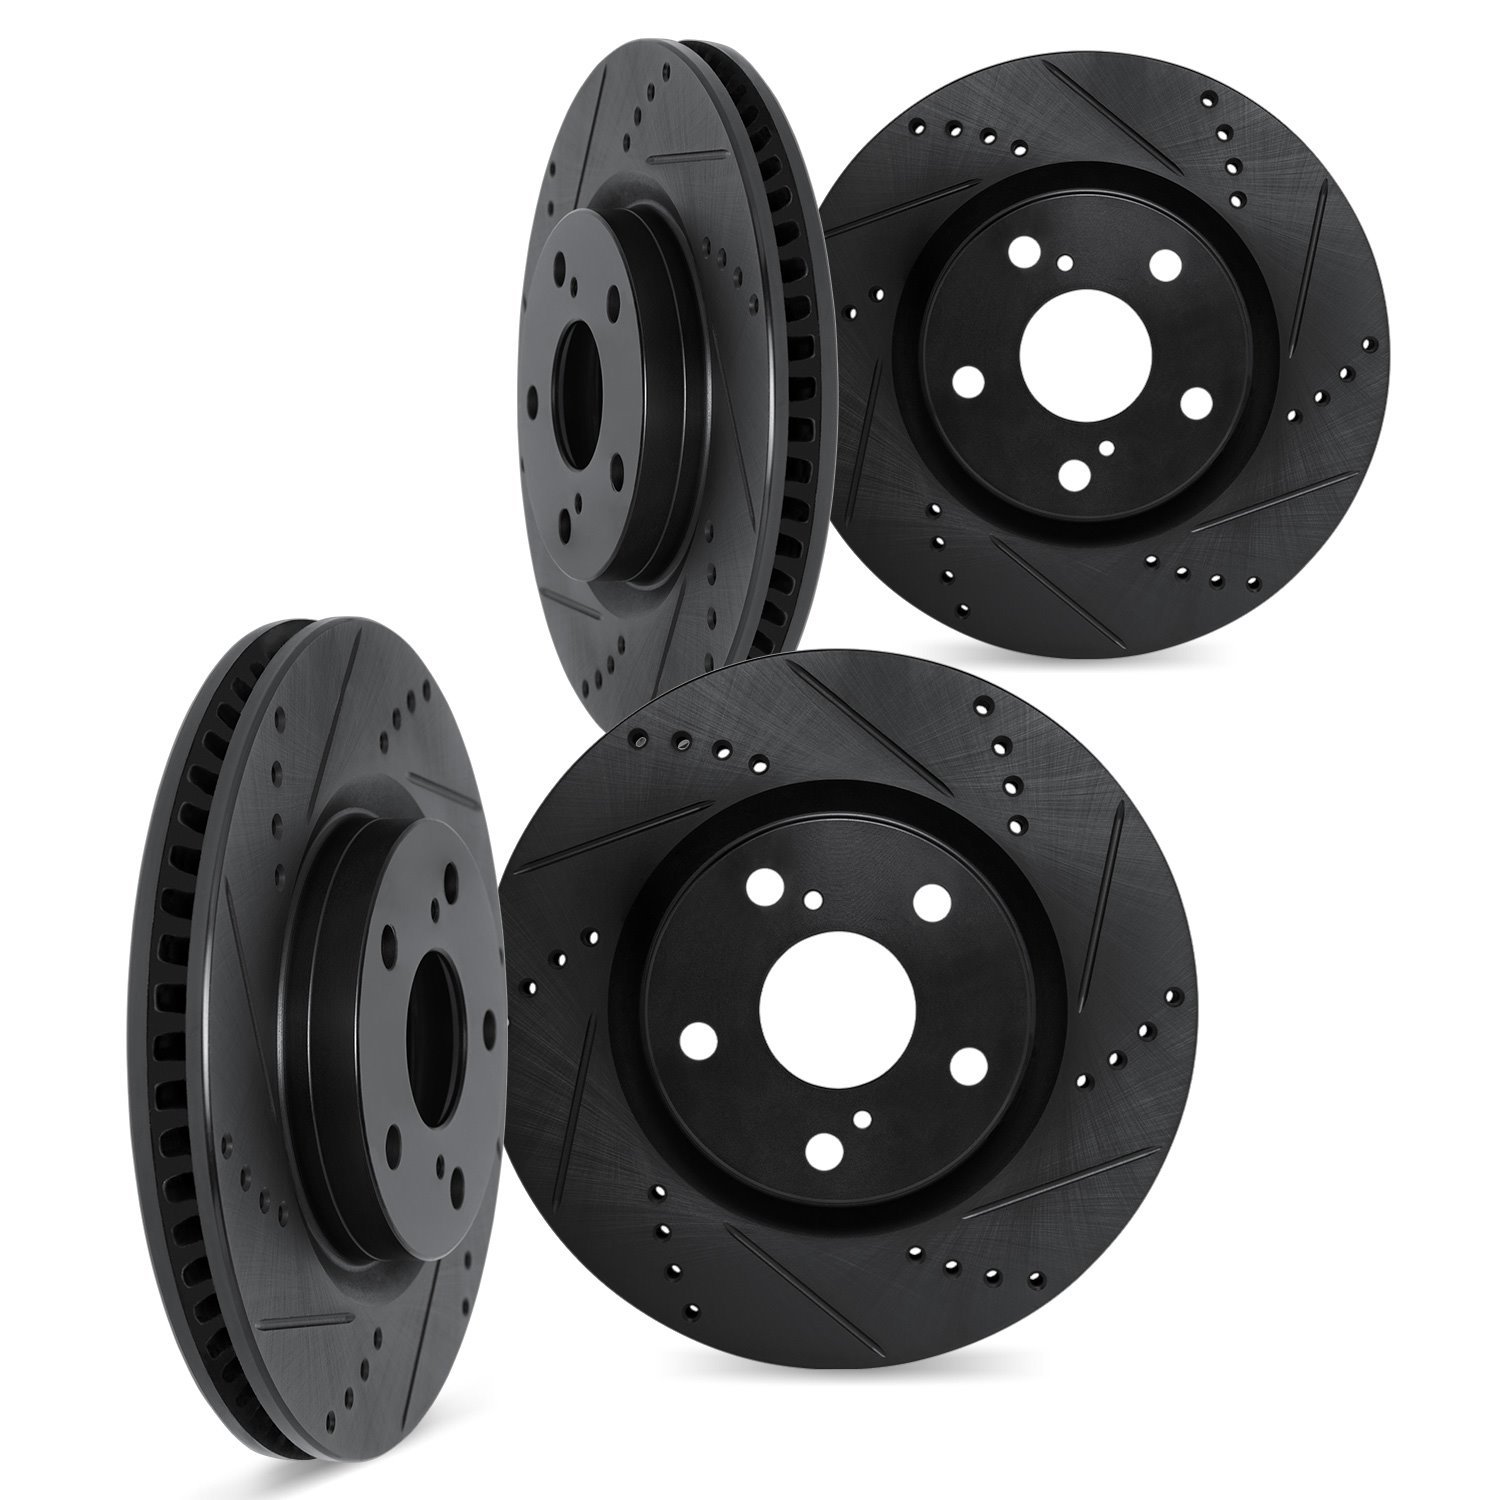 8004-72068 Drilled/Slotted Brake Rotors [Black], 2008-2015 Mitsubishi, Position: Front and Rear